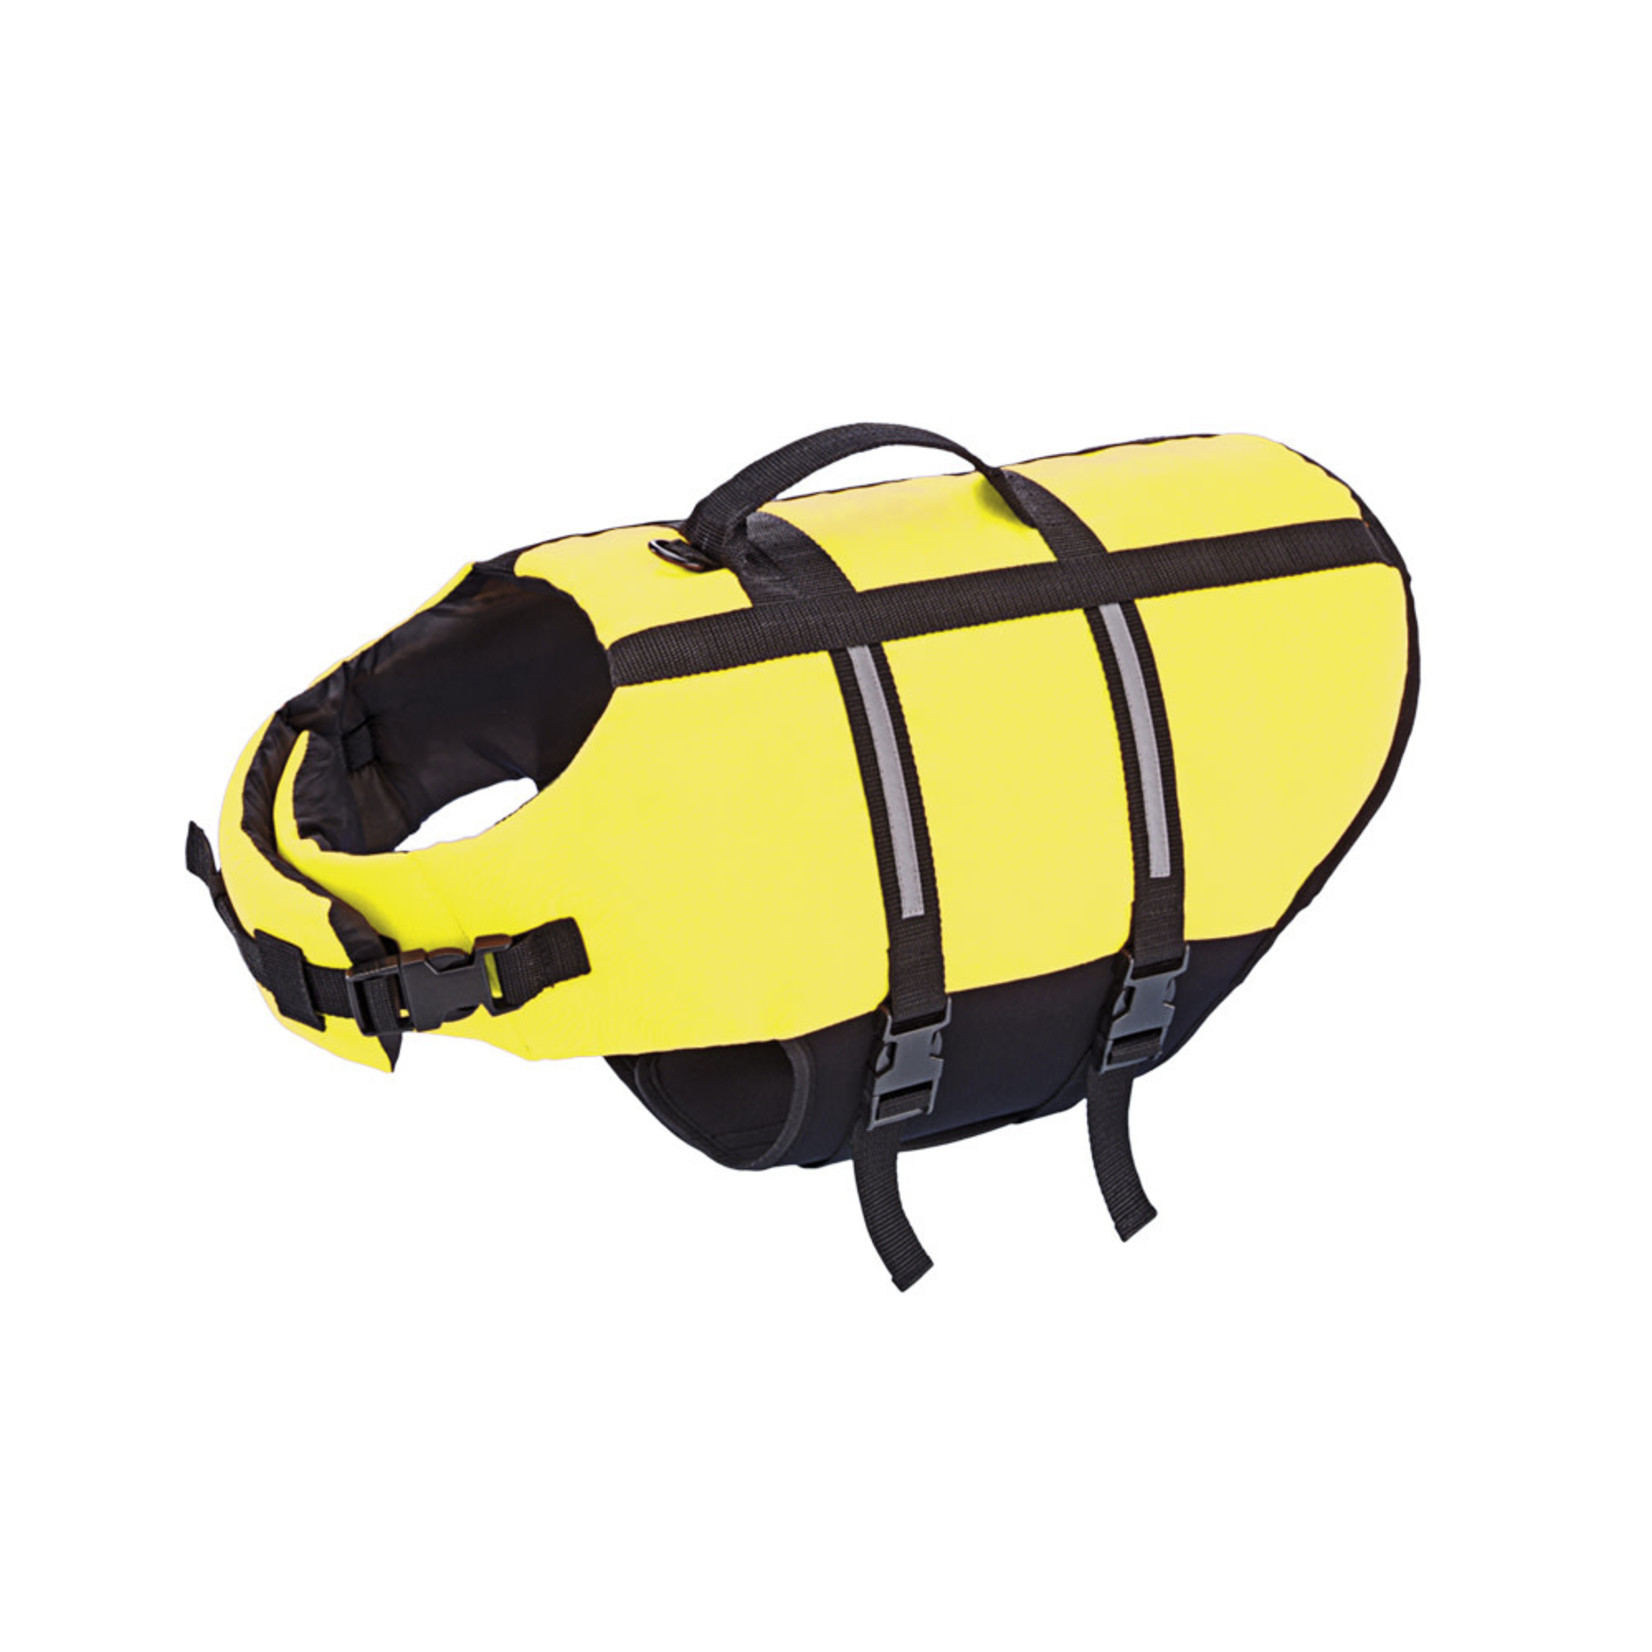 Nobby Dog Buoyancy Aid with Reflective Stripes, Neon Yellow